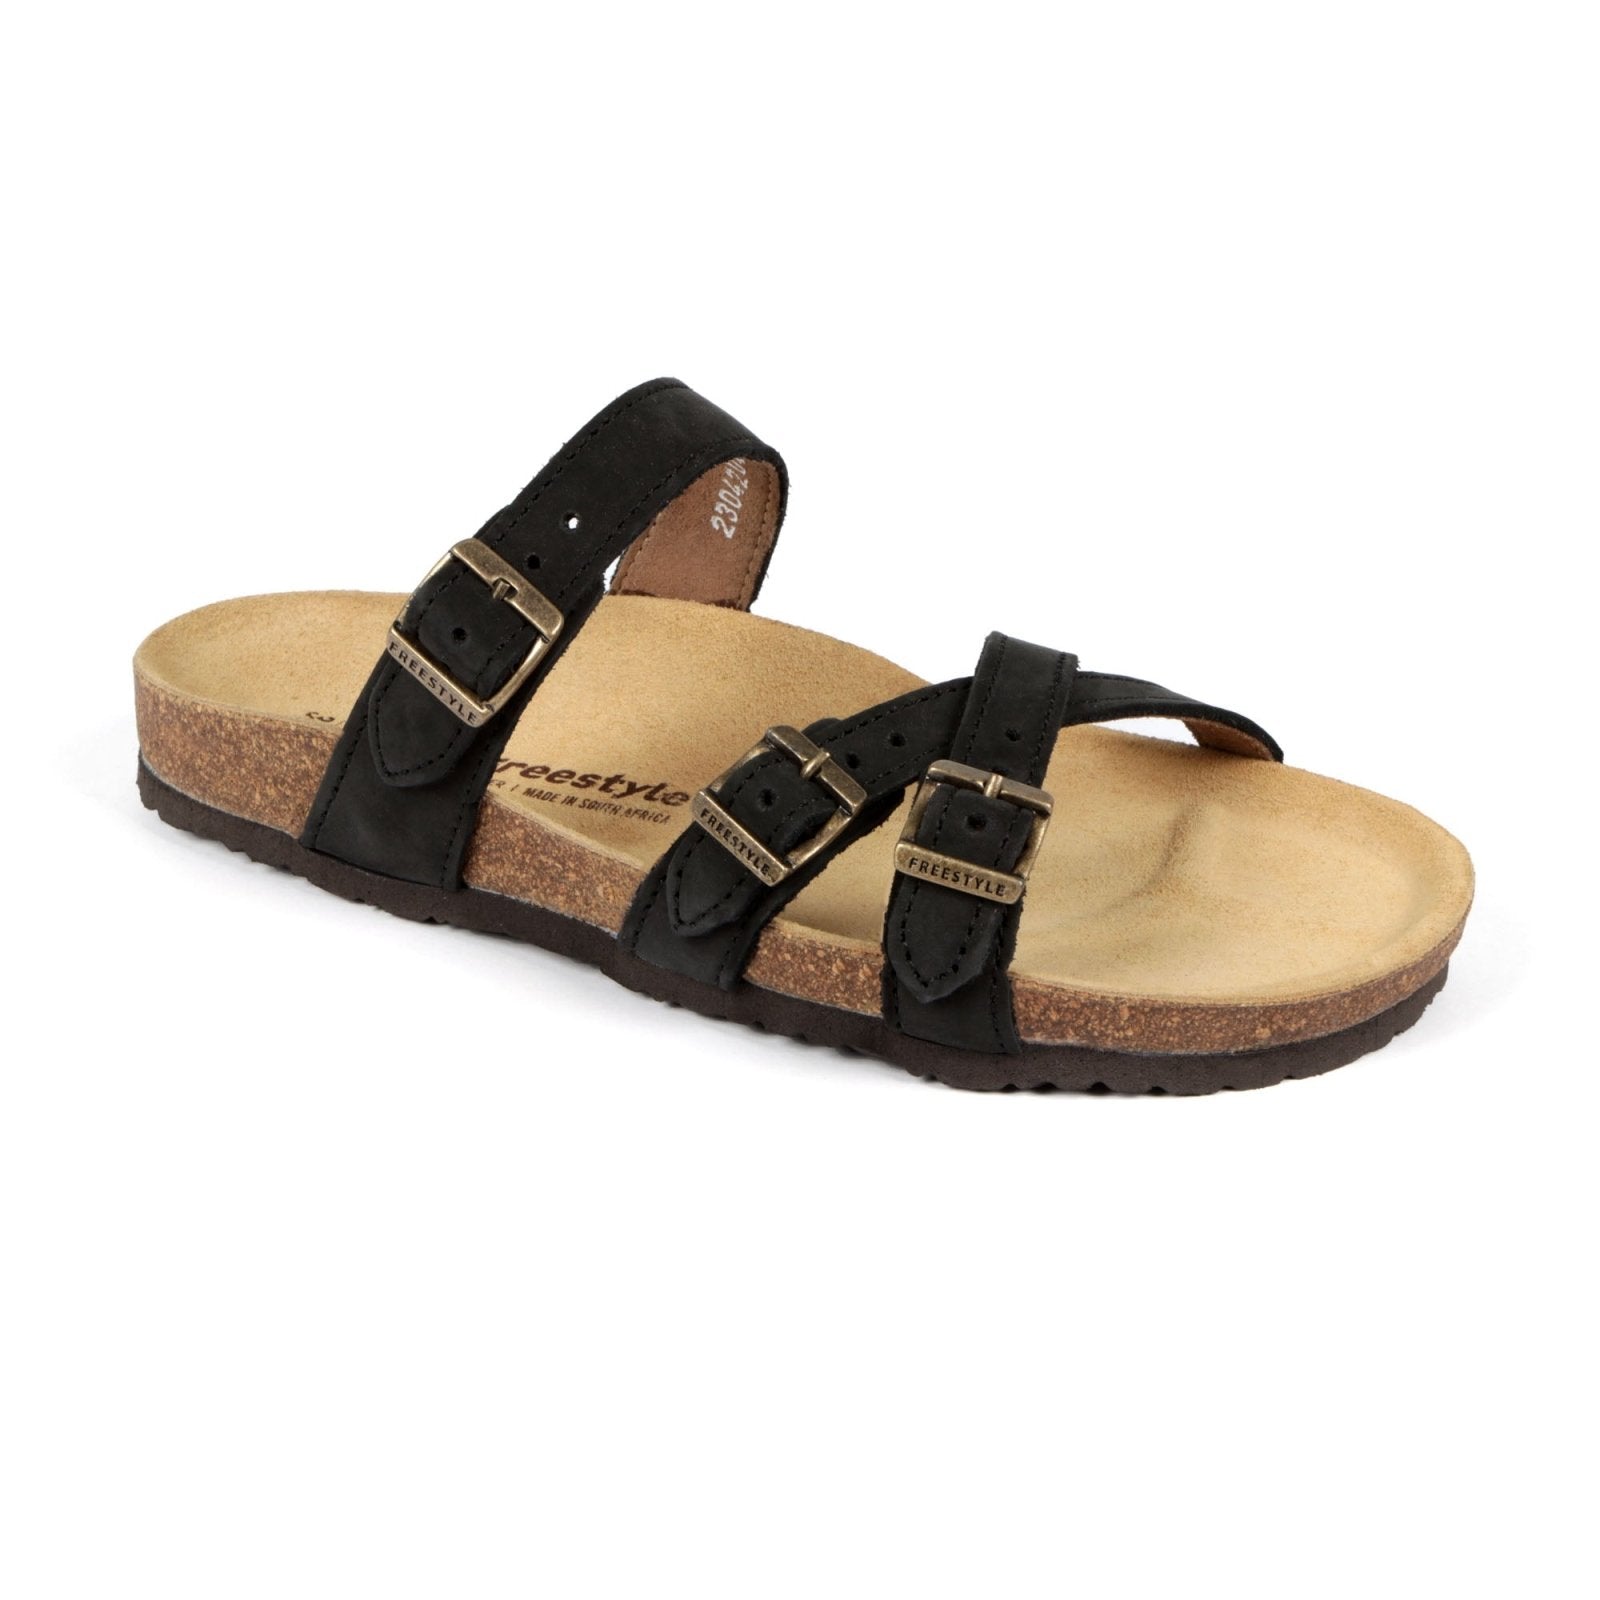 Corkies Anke Anatomical Cork Footbed Premium leather health sandal - Freestyle SA Proudly local Leather Goods Supplier leather boots veldskoens vellies leather shoes suede veldskoens